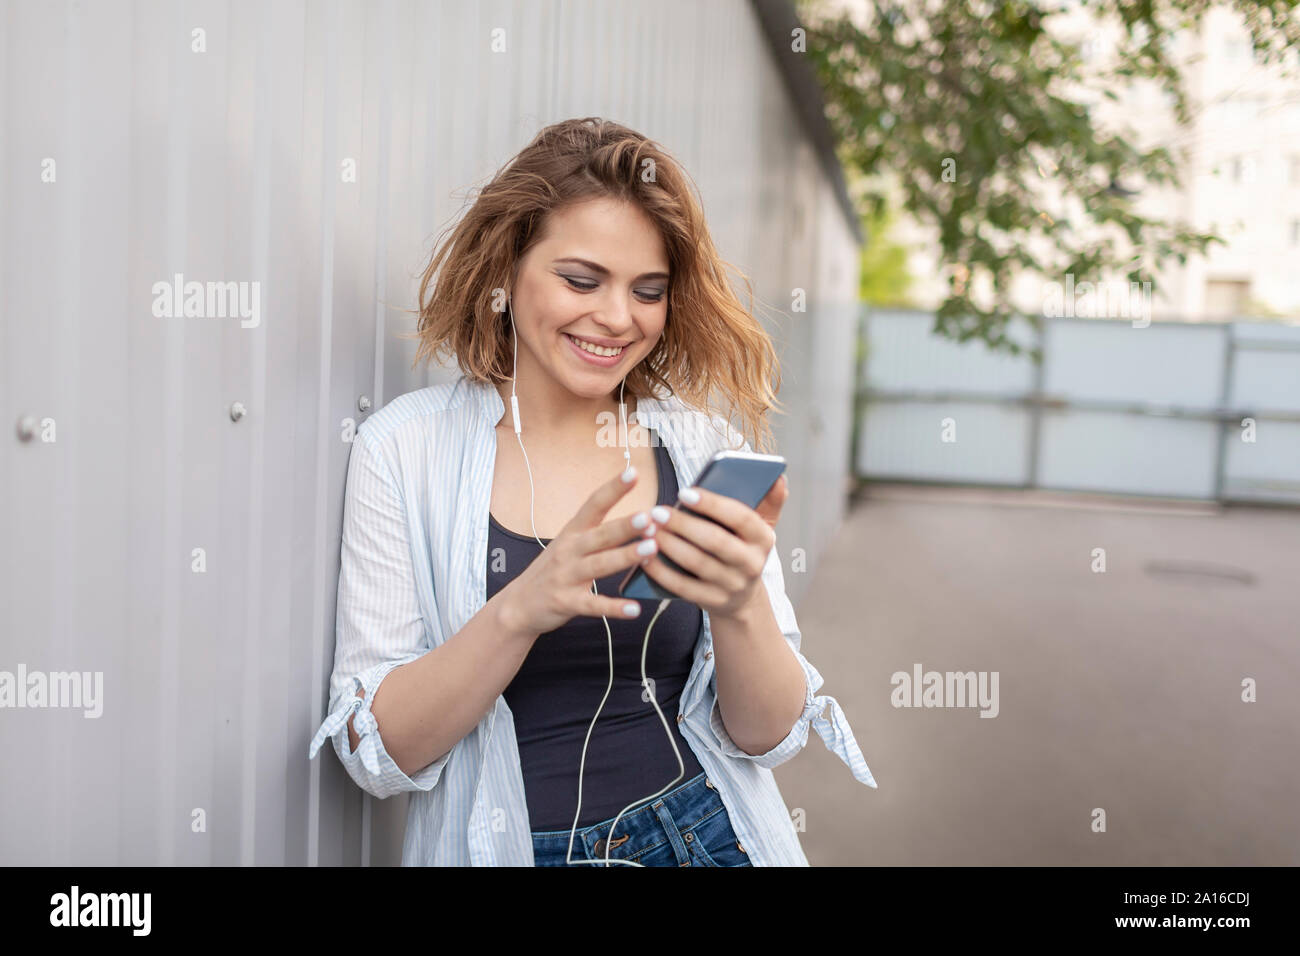 East European woman using smartphone Banque D'Images